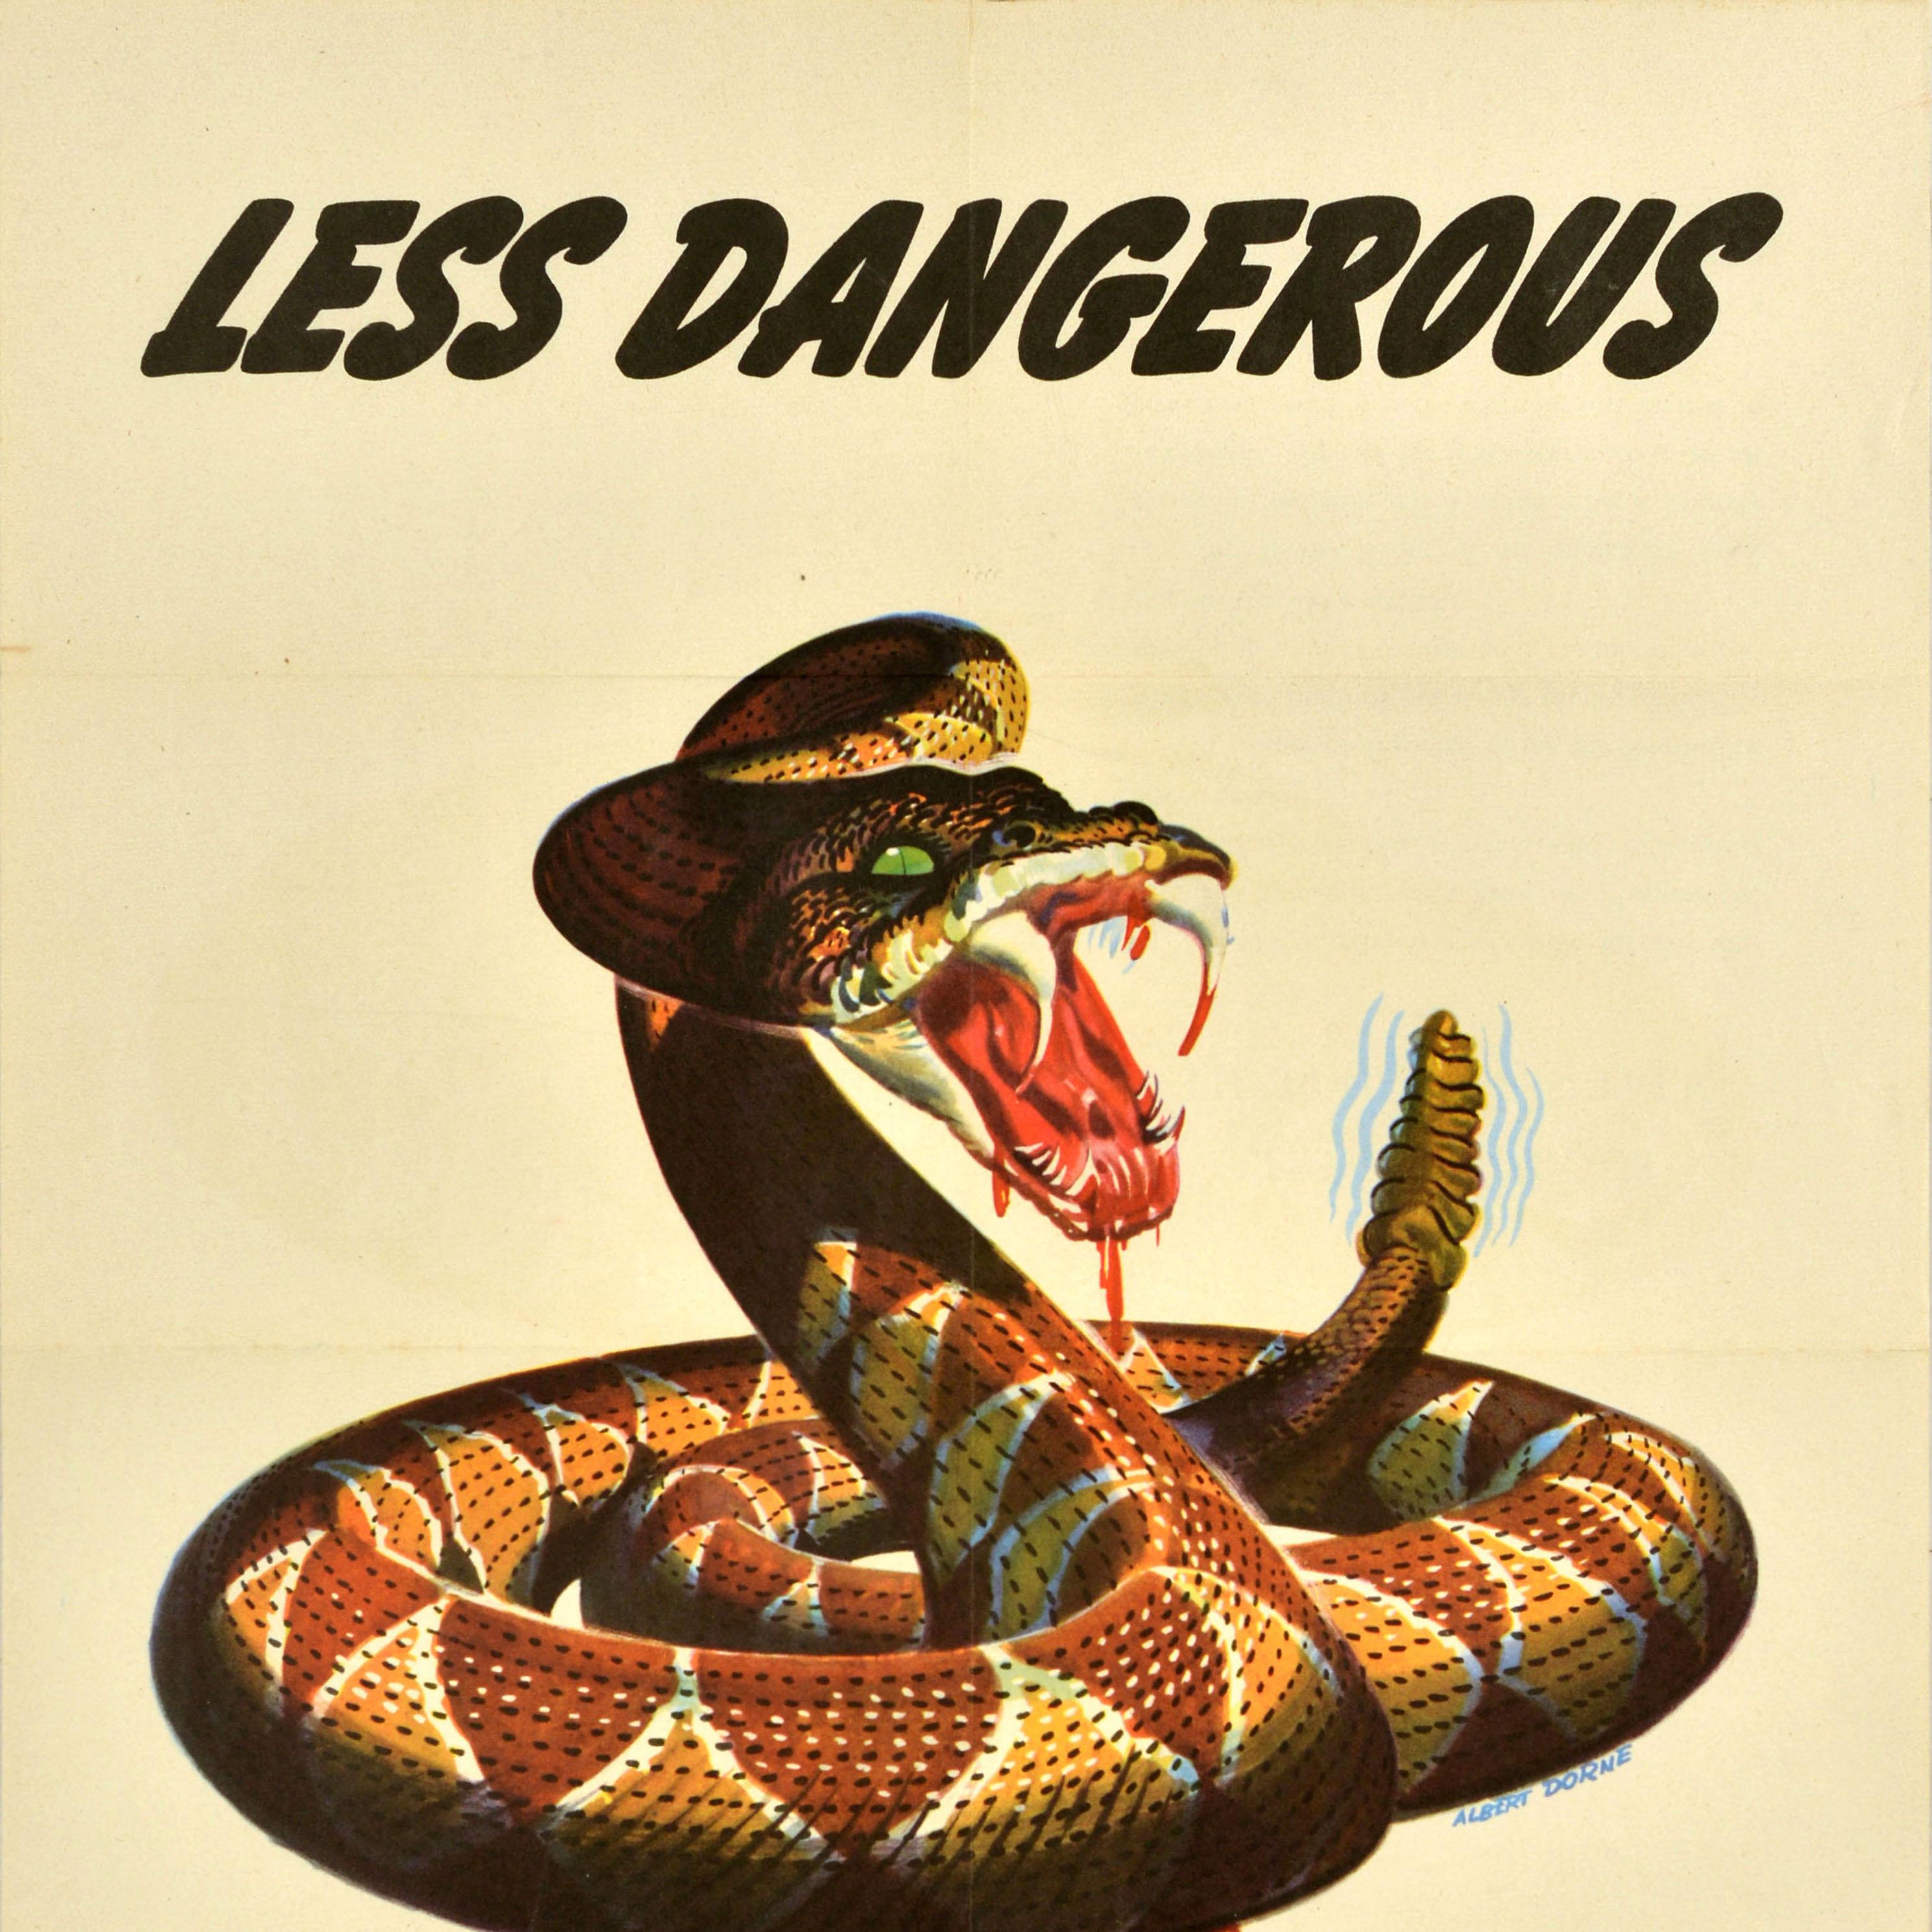 Original vintage World War Two propaganda poster - Less dangerous than careless talk Don't discuss Troop movements Ship sailings War equipment - featuring a great illustration of a rattlesnake with green eyes and blood dripping from the sharp fangs